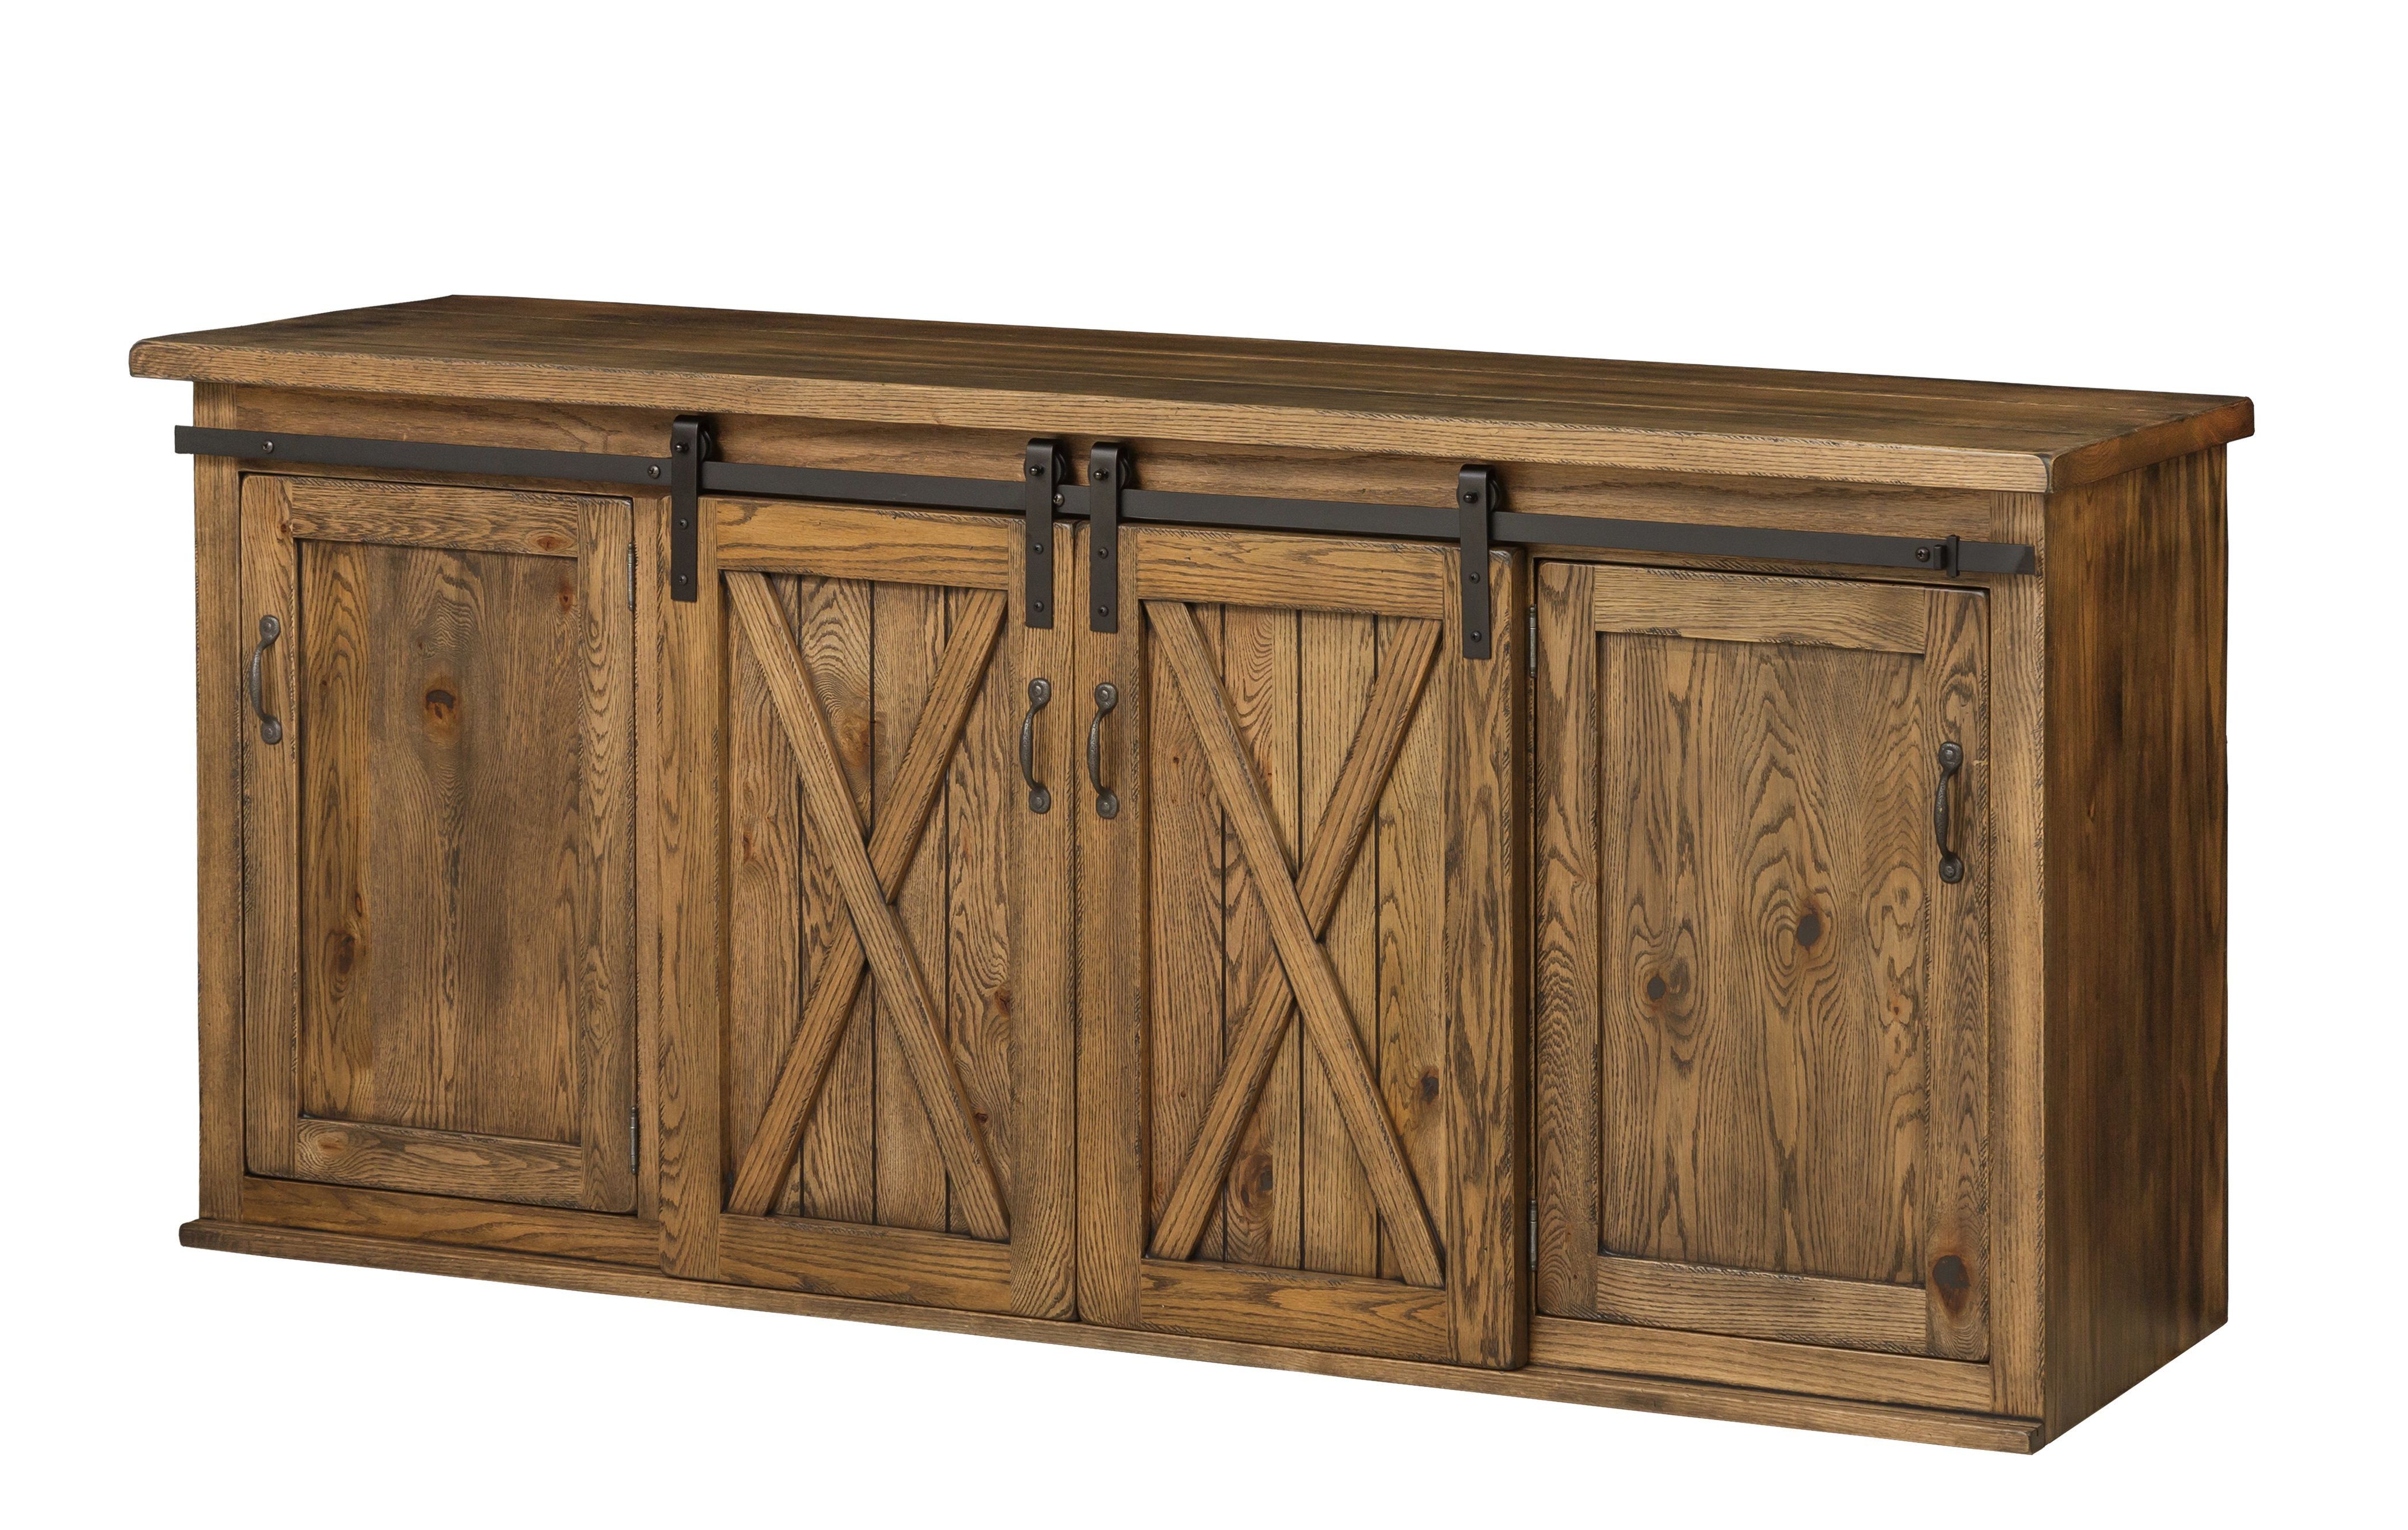 New England 74" Dining Buffet With Sliding Barn Doors From For Sideboards Double Barn Door Buffet (View 3 of 20)